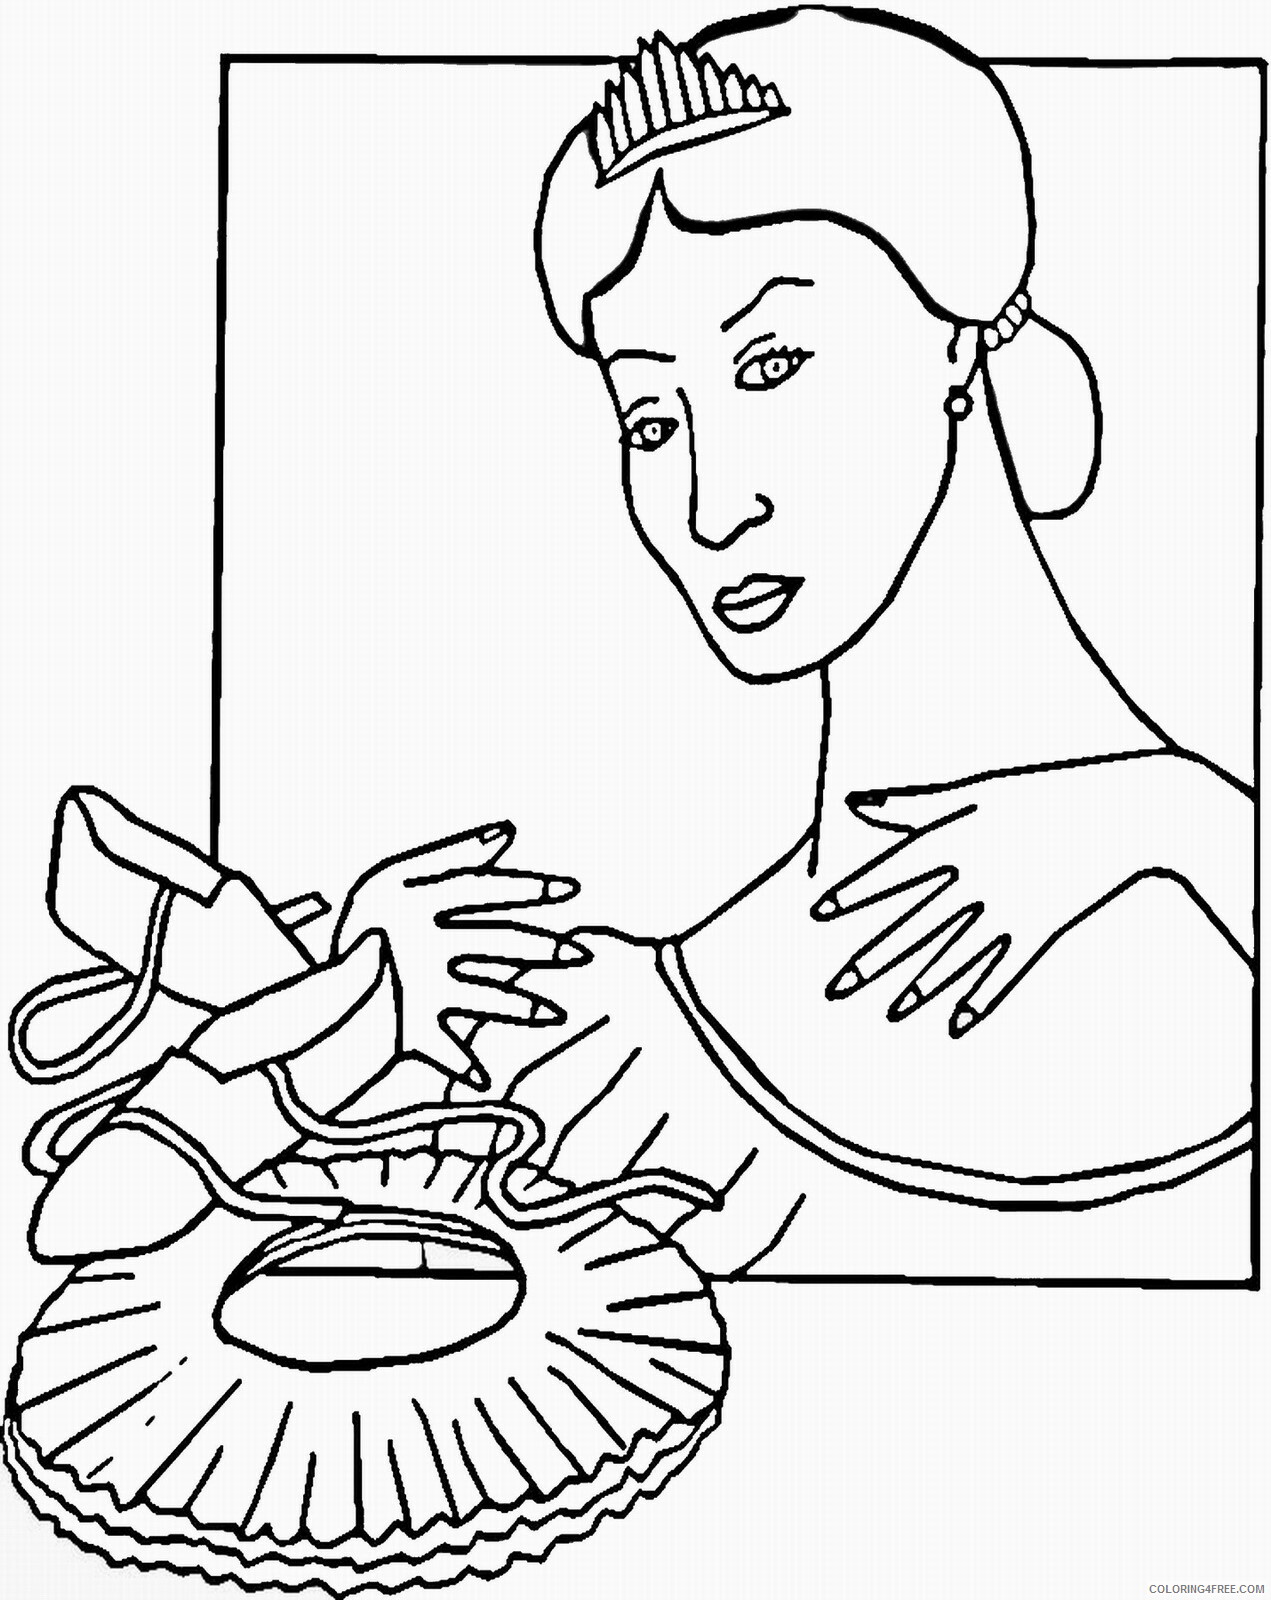 Ballerina Coloring Pages ballerinac49 Printable 2021 0483 Coloring4free